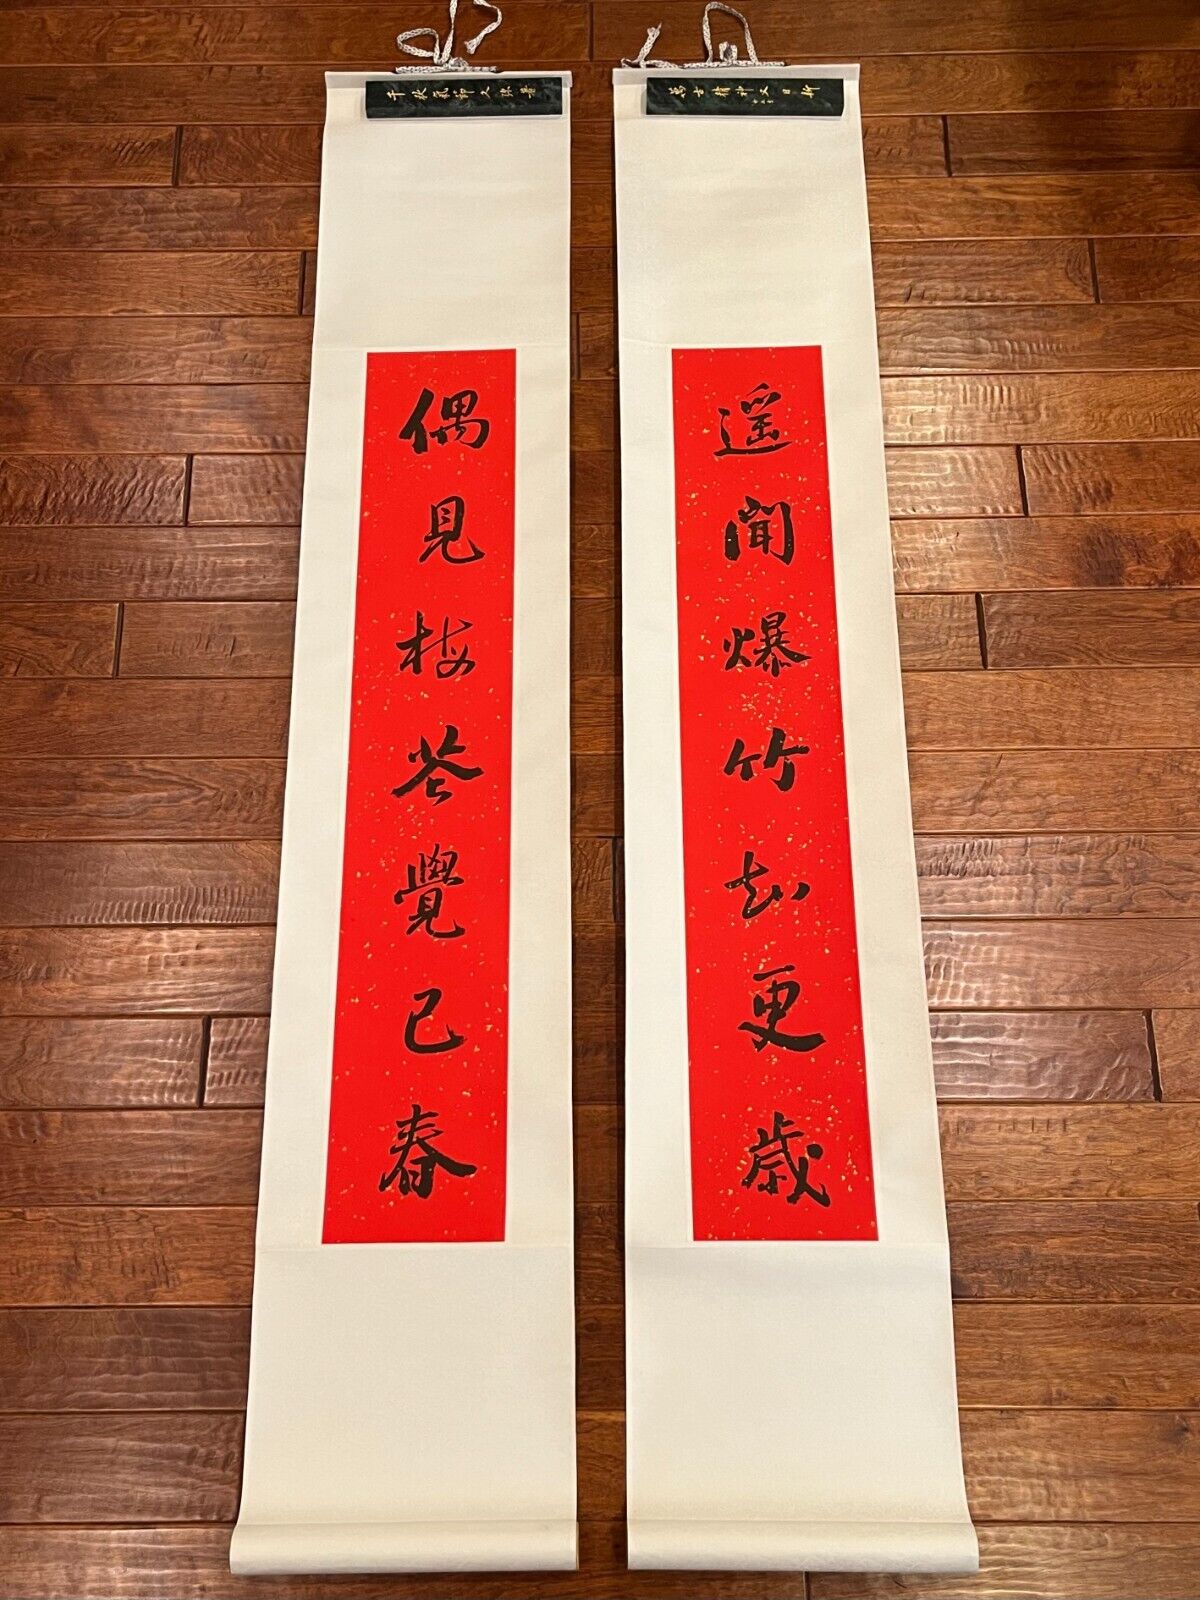 Vintage Chinese Unsigned Calligraphy Couplet Scrolls From Taiwan